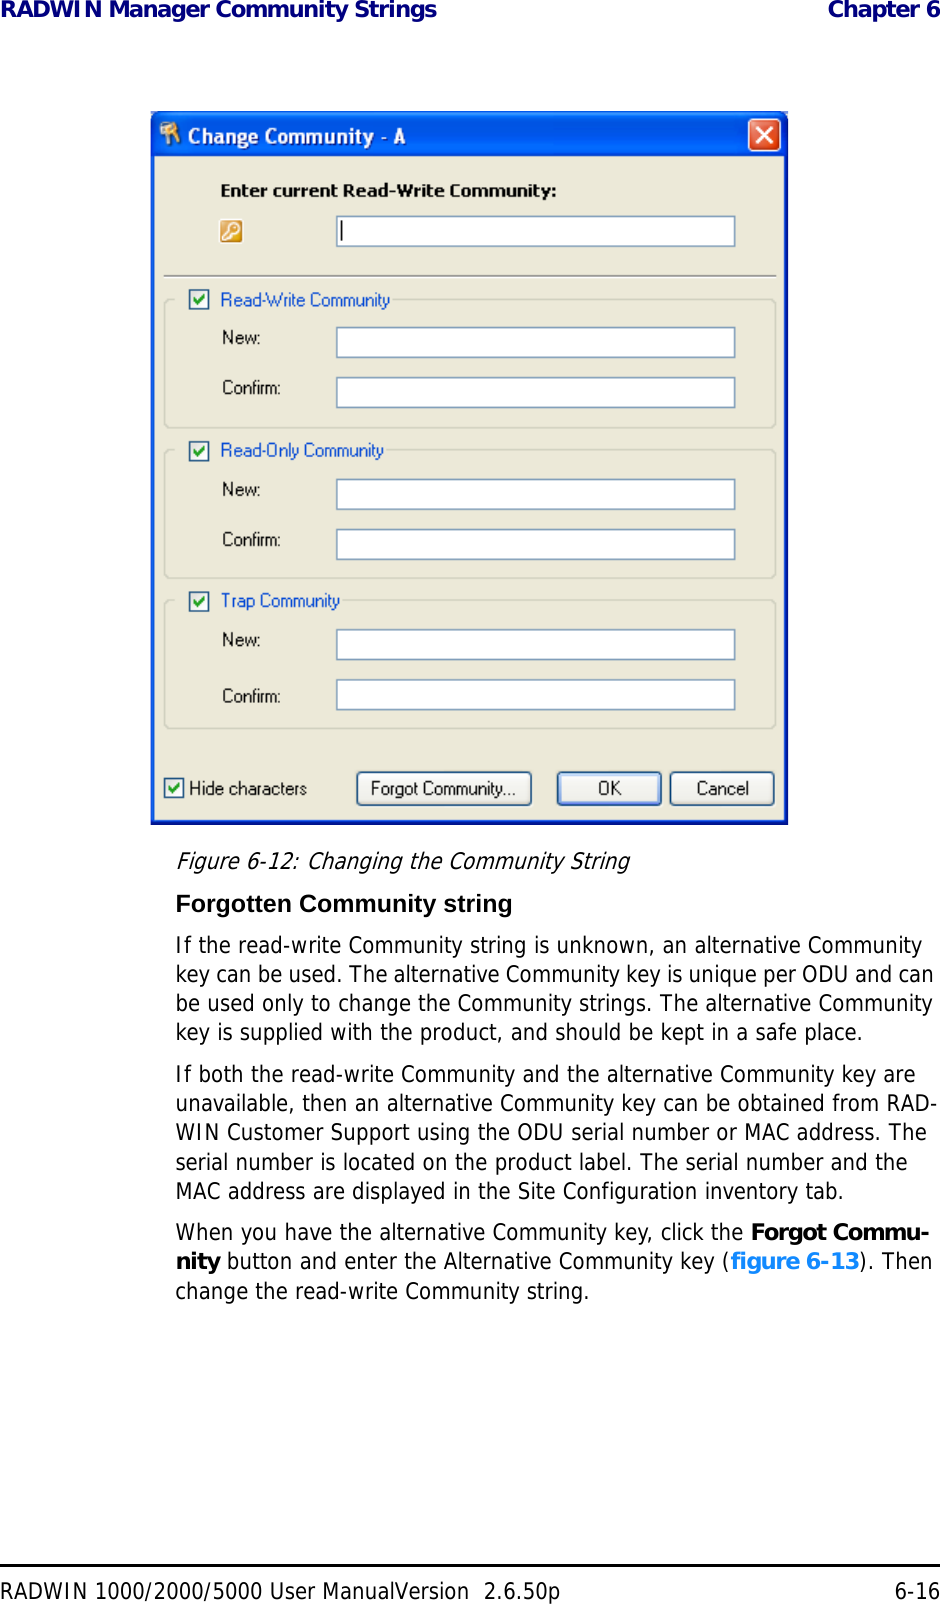 RADWIN Manager Community Strings  Chapter 6RADWIN 1000/2000/5000 User ManualVersion  2.6.50p 6-16Figure 6-12: Changing the Community StringForgotten Community stringIf the read-write Community string is unknown, an alternative Community key can be used. The alternative Community key is unique per ODU and can be used only to change the Community strings. The alternative Community key is supplied with the product, and should be kept in a safe place. If both the read-write Community and the alternative Community key are unavailable, then an alternative Community key can be obtained from RAD-WIN Customer Support using the ODU serial number or MAC address. The serial number is located on the product label. The serial number and the MAC address are displayed in the Site Configuration inventory tab.When you have the alternative Community key, click the Forgot Commu-nity button and enter the Alternative Community key (figure 6-13). Then change the read-write Community string.